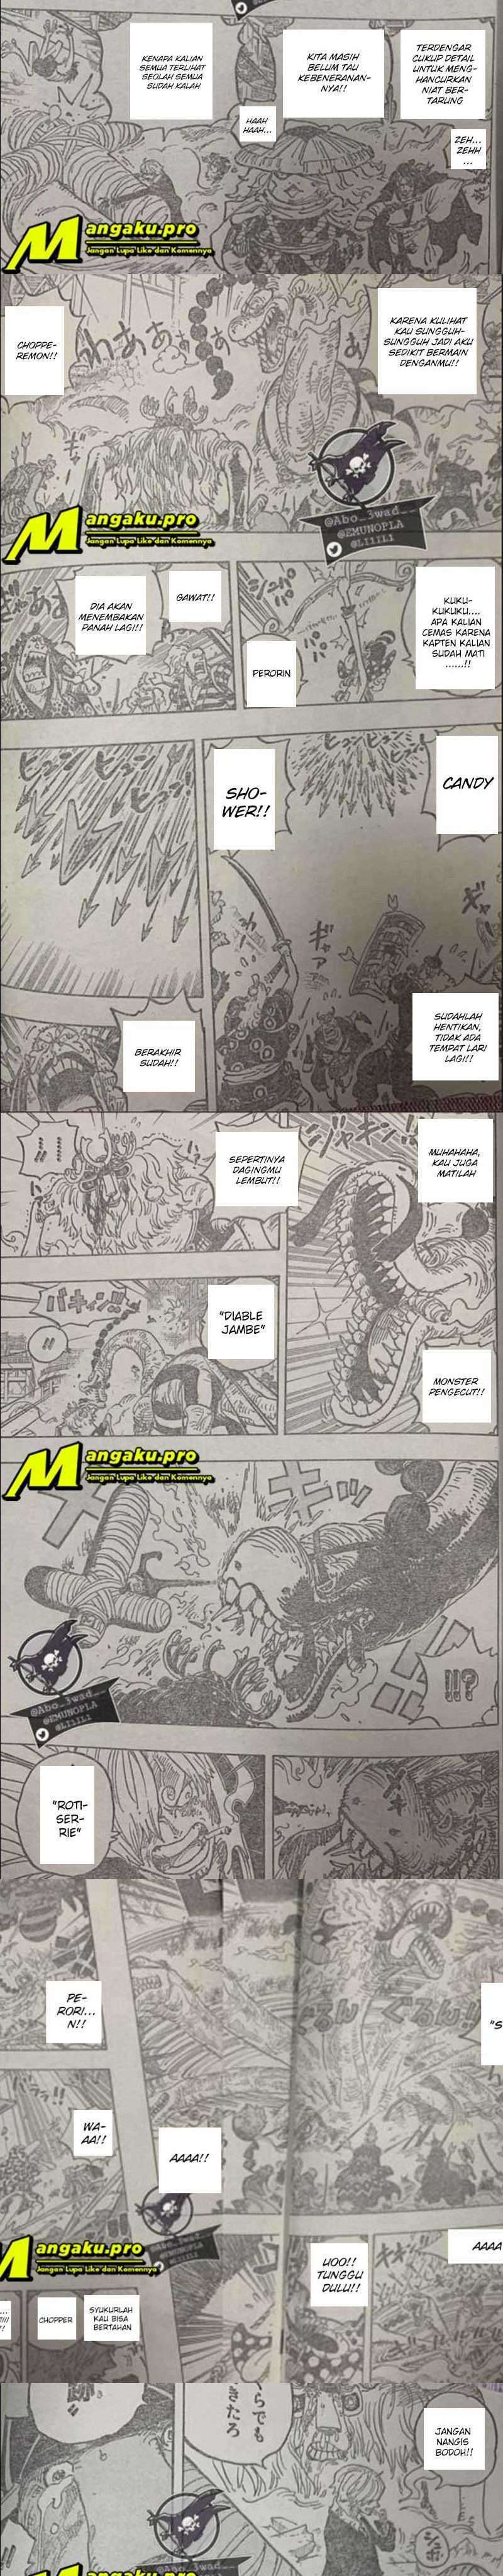 One Piece Chapter 1015 lq Image 1